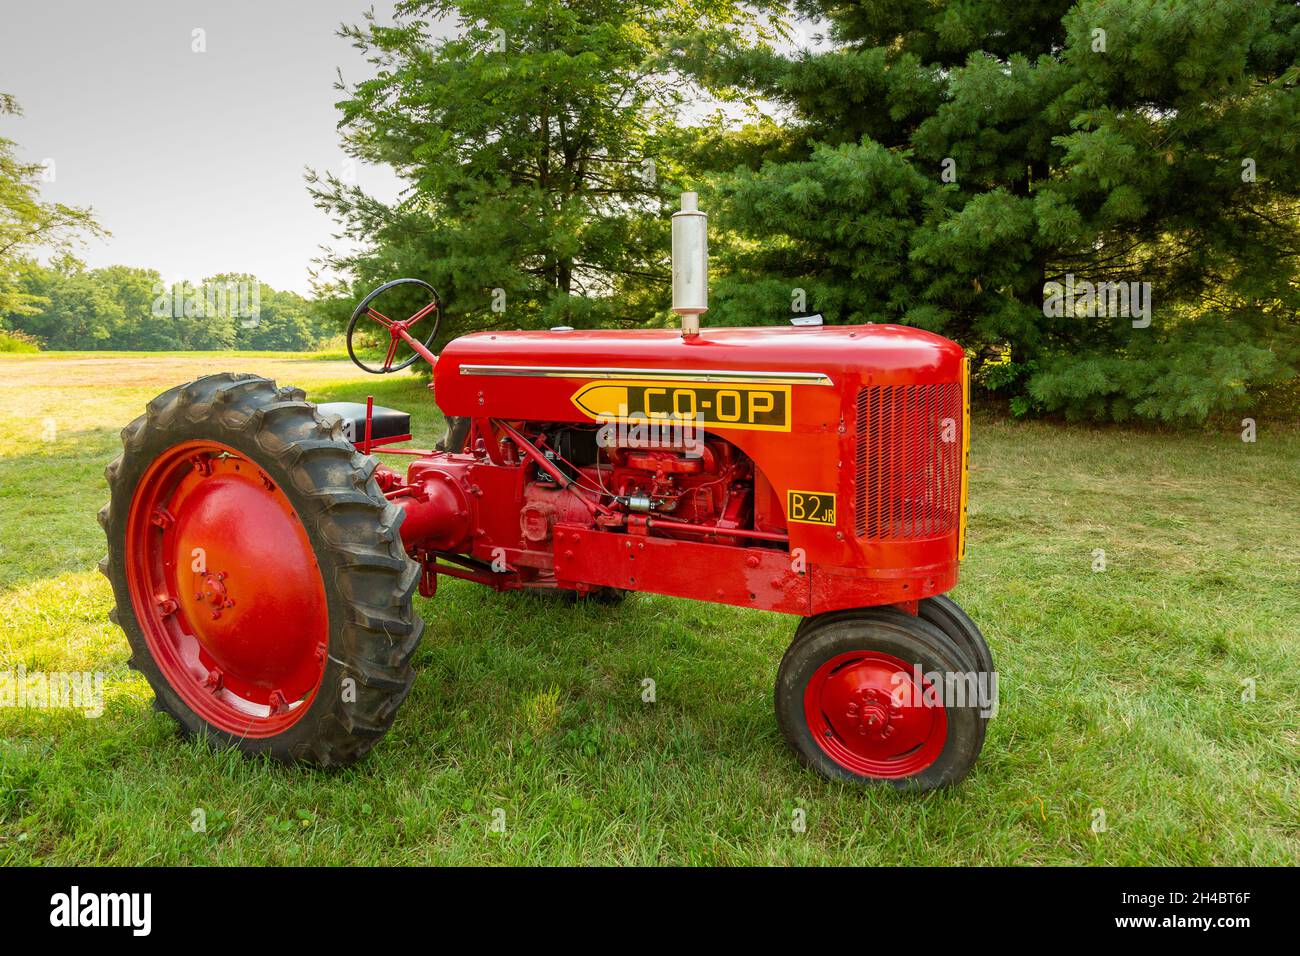 A red antique Co-Op B2 row crop farm tractor in Warren, Indiana, USA. Stock Photo